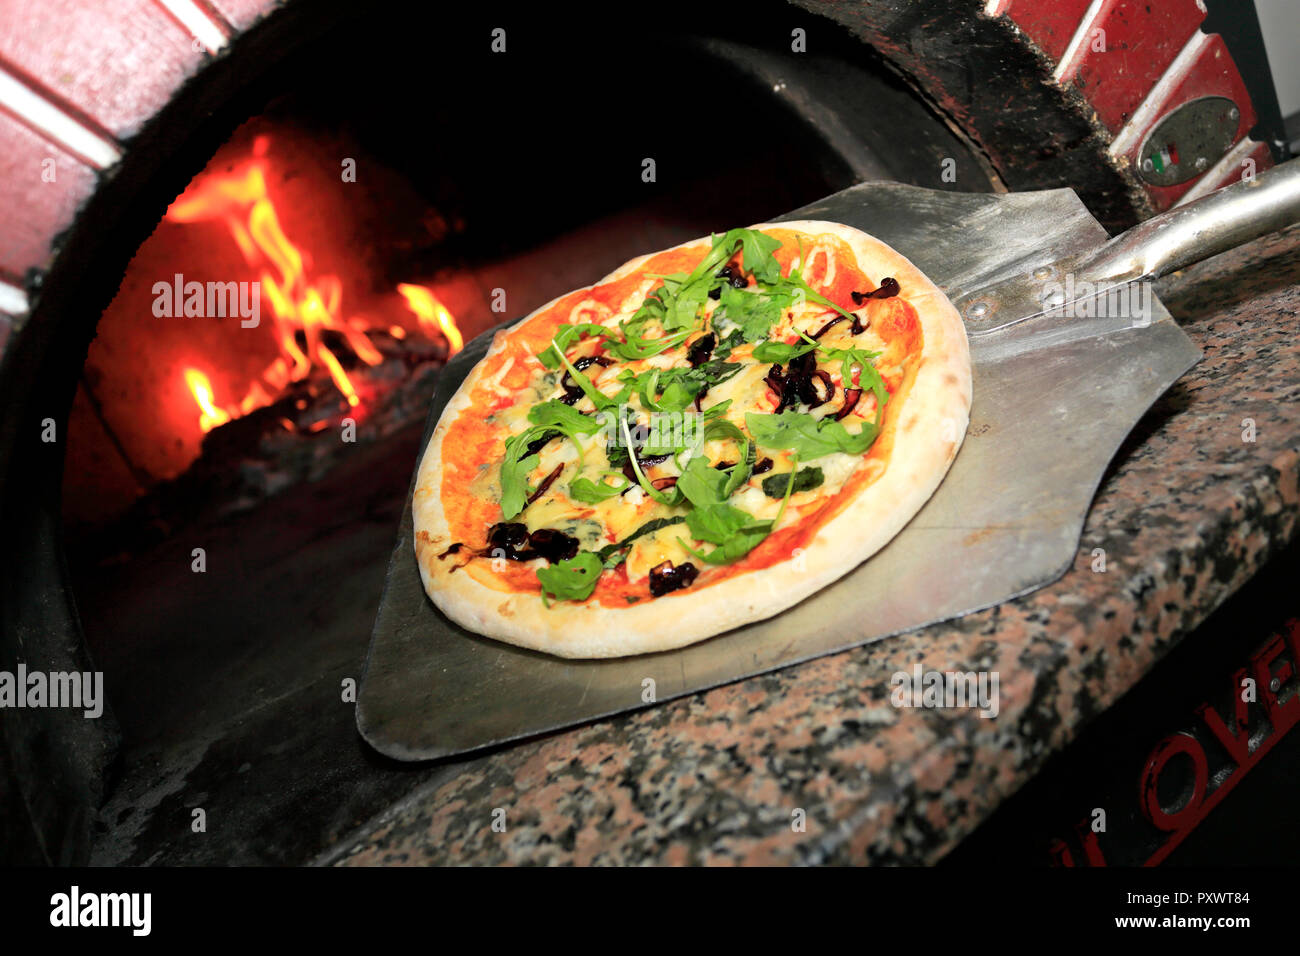 Black Olives, Italian sausage, Ham, fresh Rocket & parmesan shavings Pizza, cooked in a traditional wood fired pizza oven Stock Photo